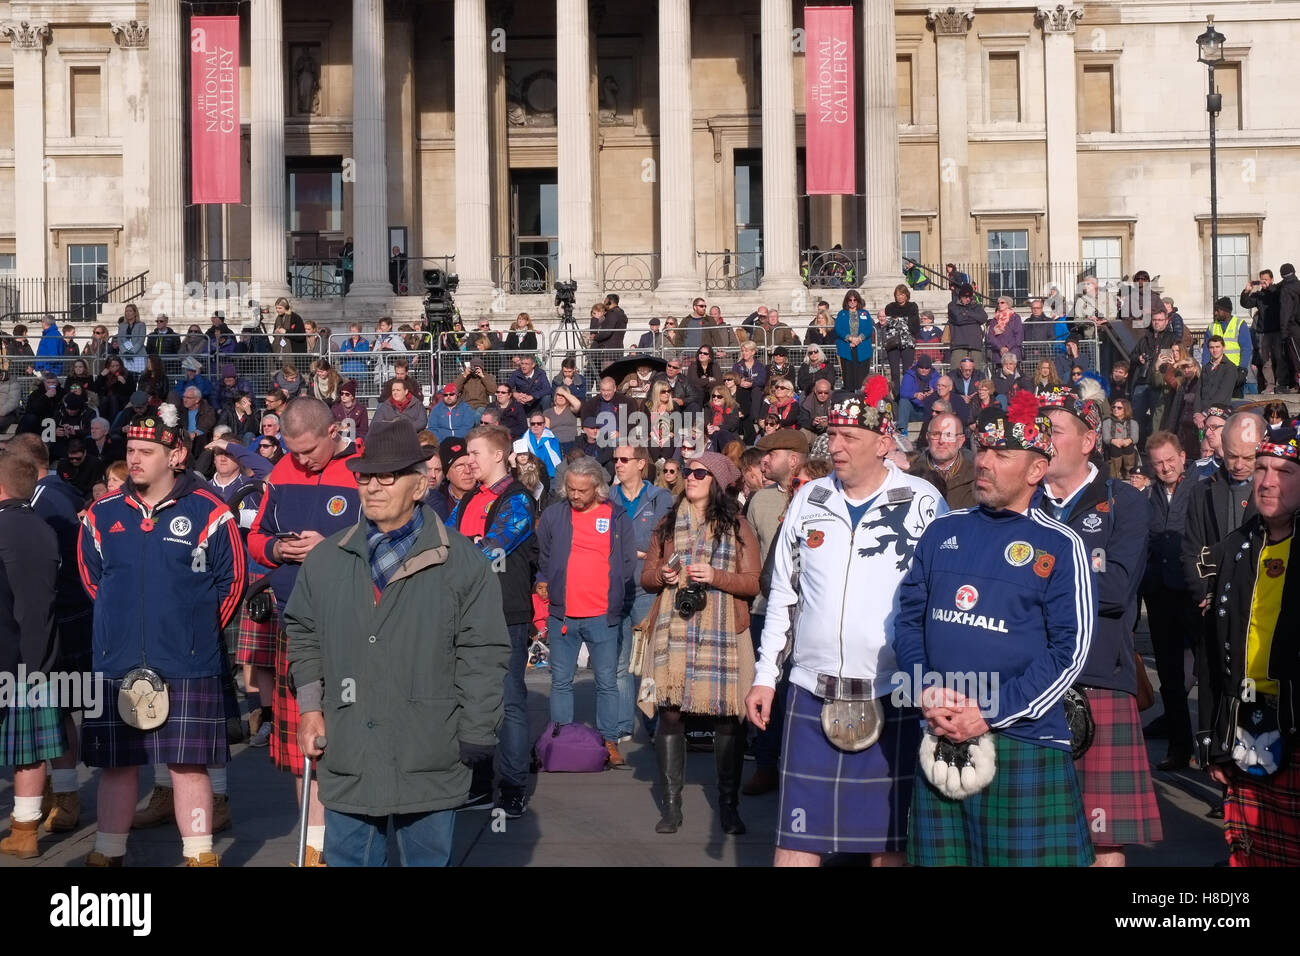 London, UK. 11th Nov, 2016. The Royal Legion hosts a performance of music and readings in Trafalgar Square, London before a Two Minutes Silence is observed at 11am. Members of the public are invited to place poppy petals in the fountains as a symbolic act of remembrance. Credit:  claire doherty/Alamy Live News Stock Photo